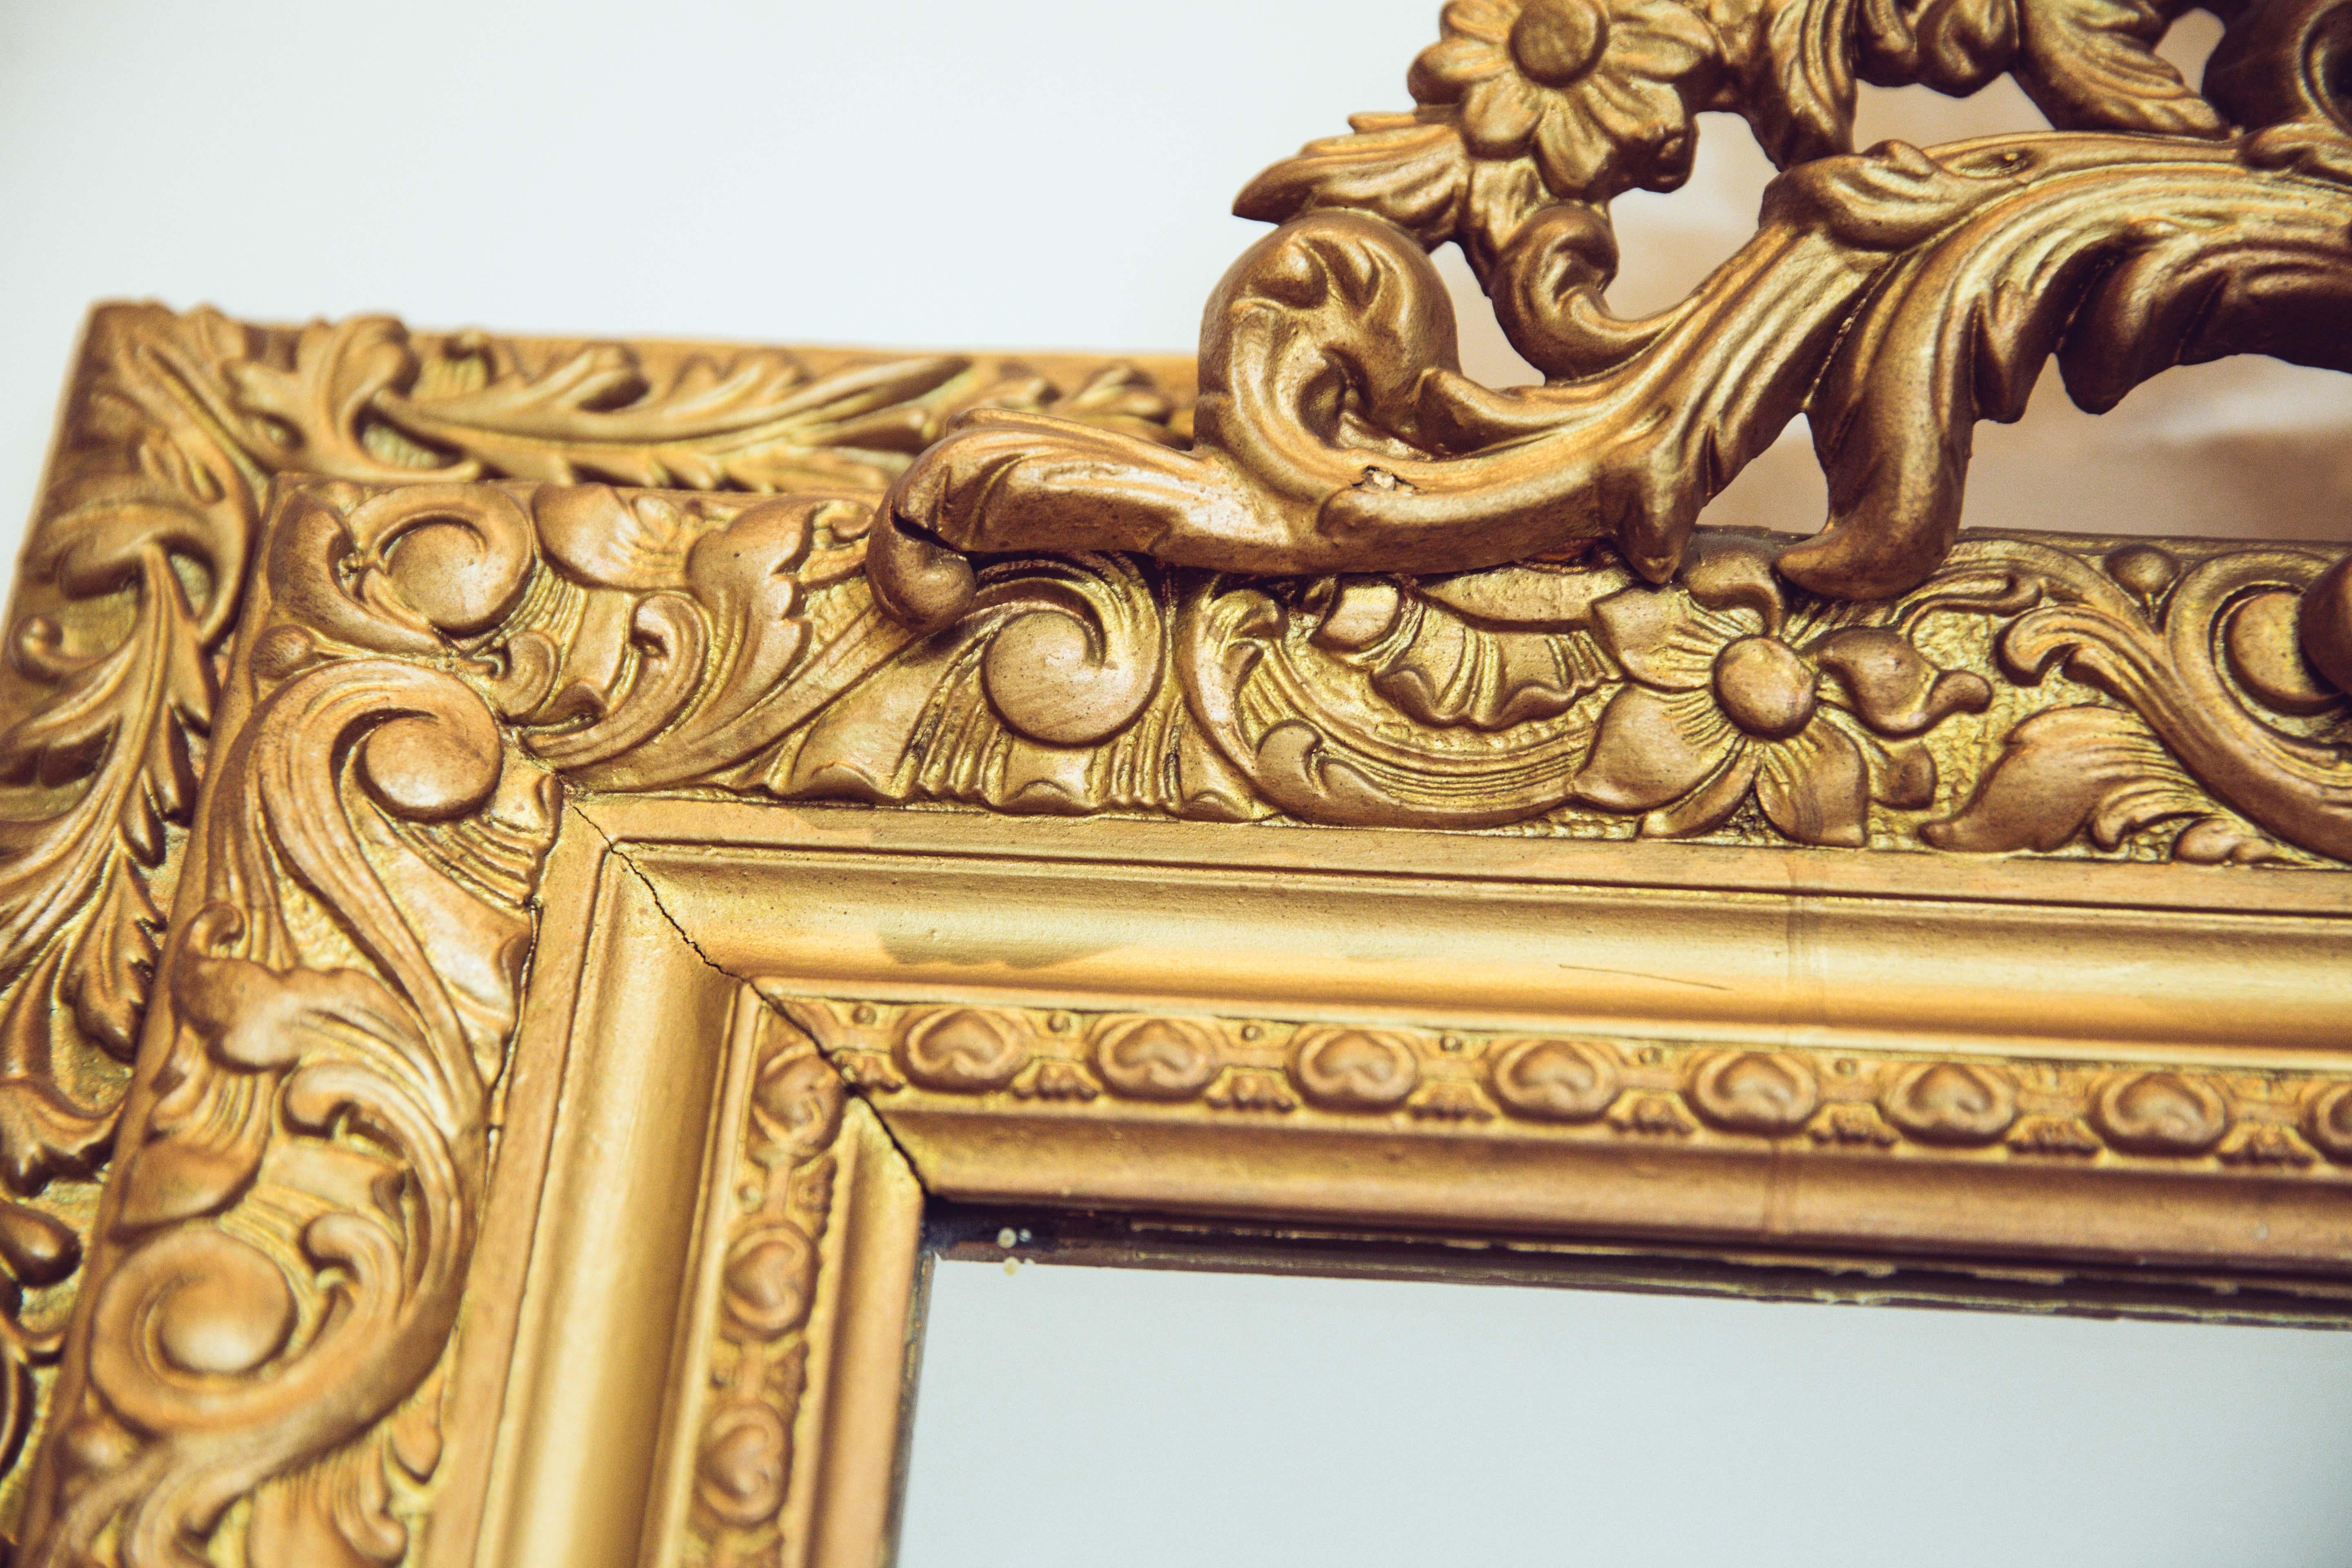 Late 19th Century 19th Century French Carved Gilded Wood Mirror with Urn Motif Crest For Sale